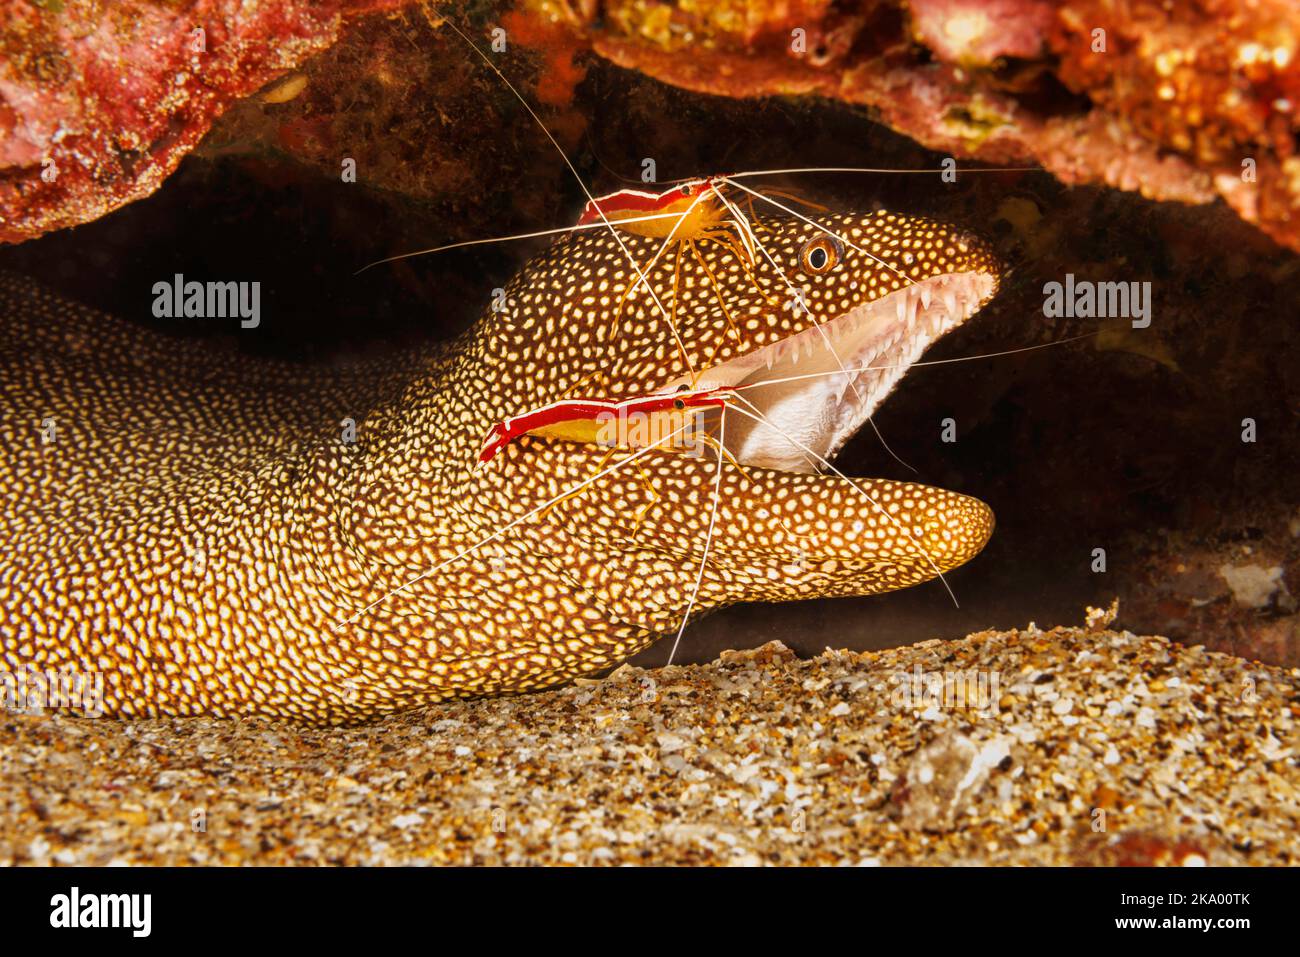 A look into the mouth of a whitemouth moray eel, Gymnothorax meleagris, that is getting inspected by two scarlet cleaner shrimp, Lysmata amboinensis, Stock Photo